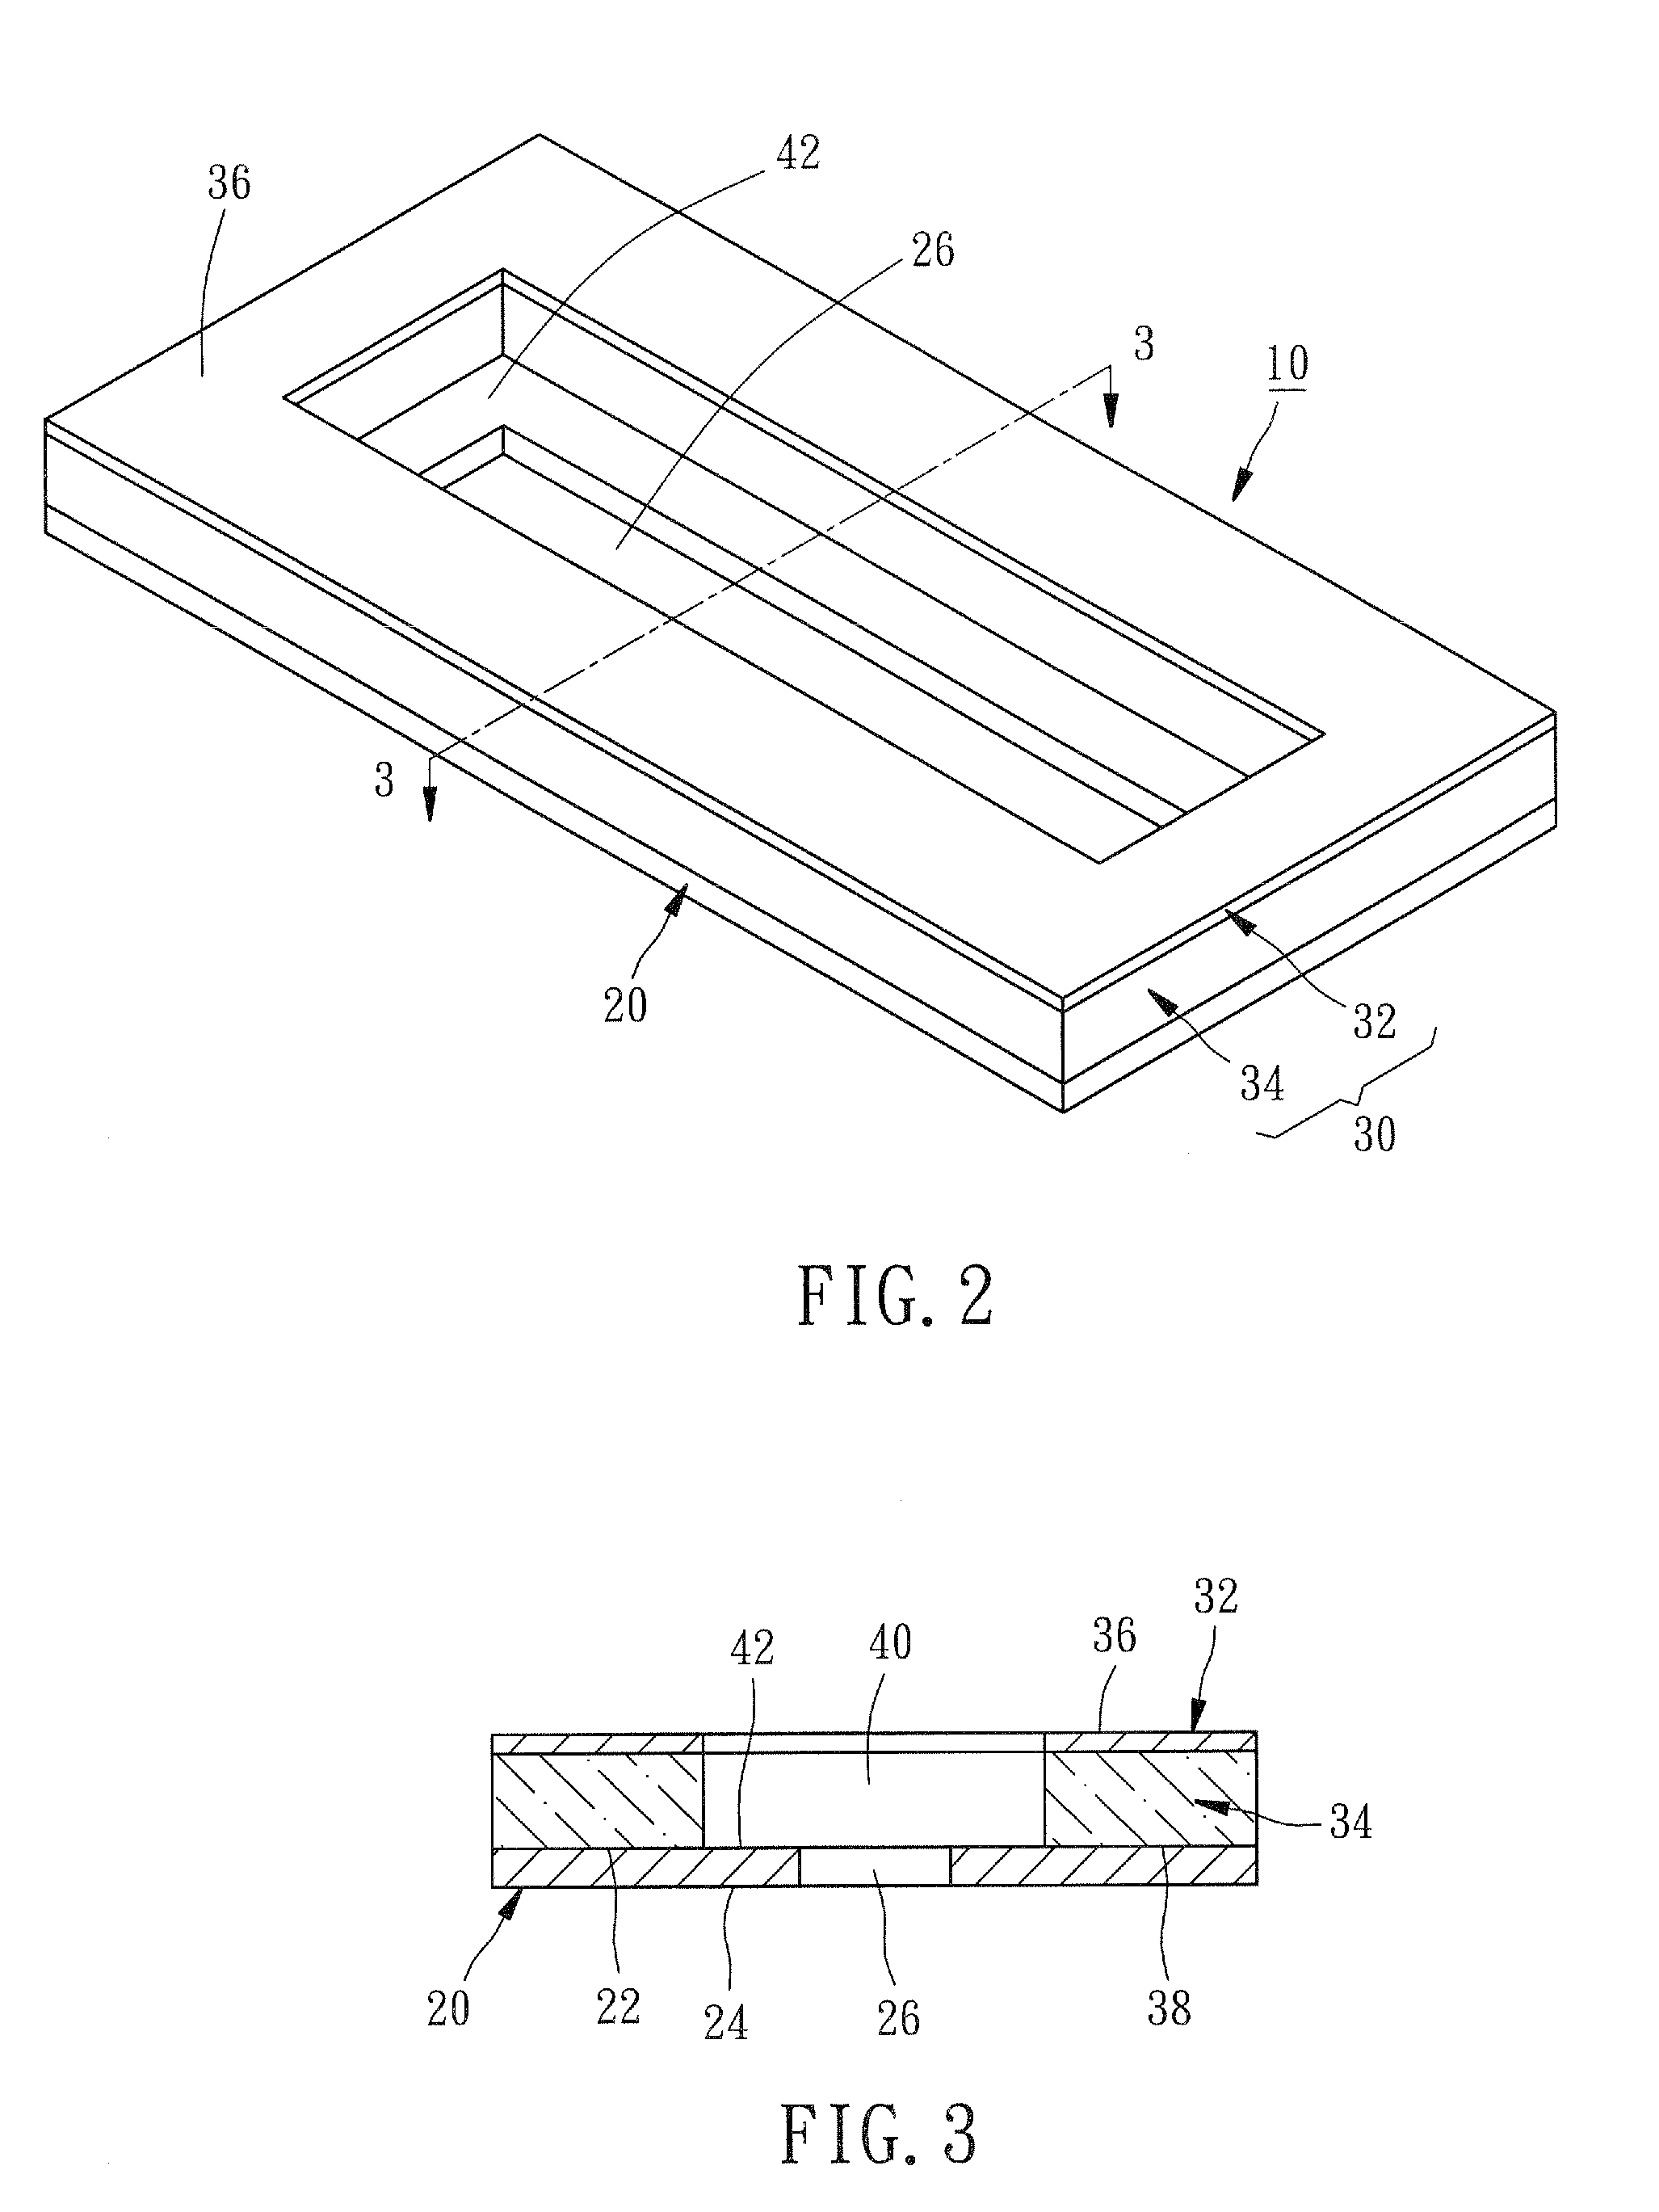 Base substrate for chip scale packaging